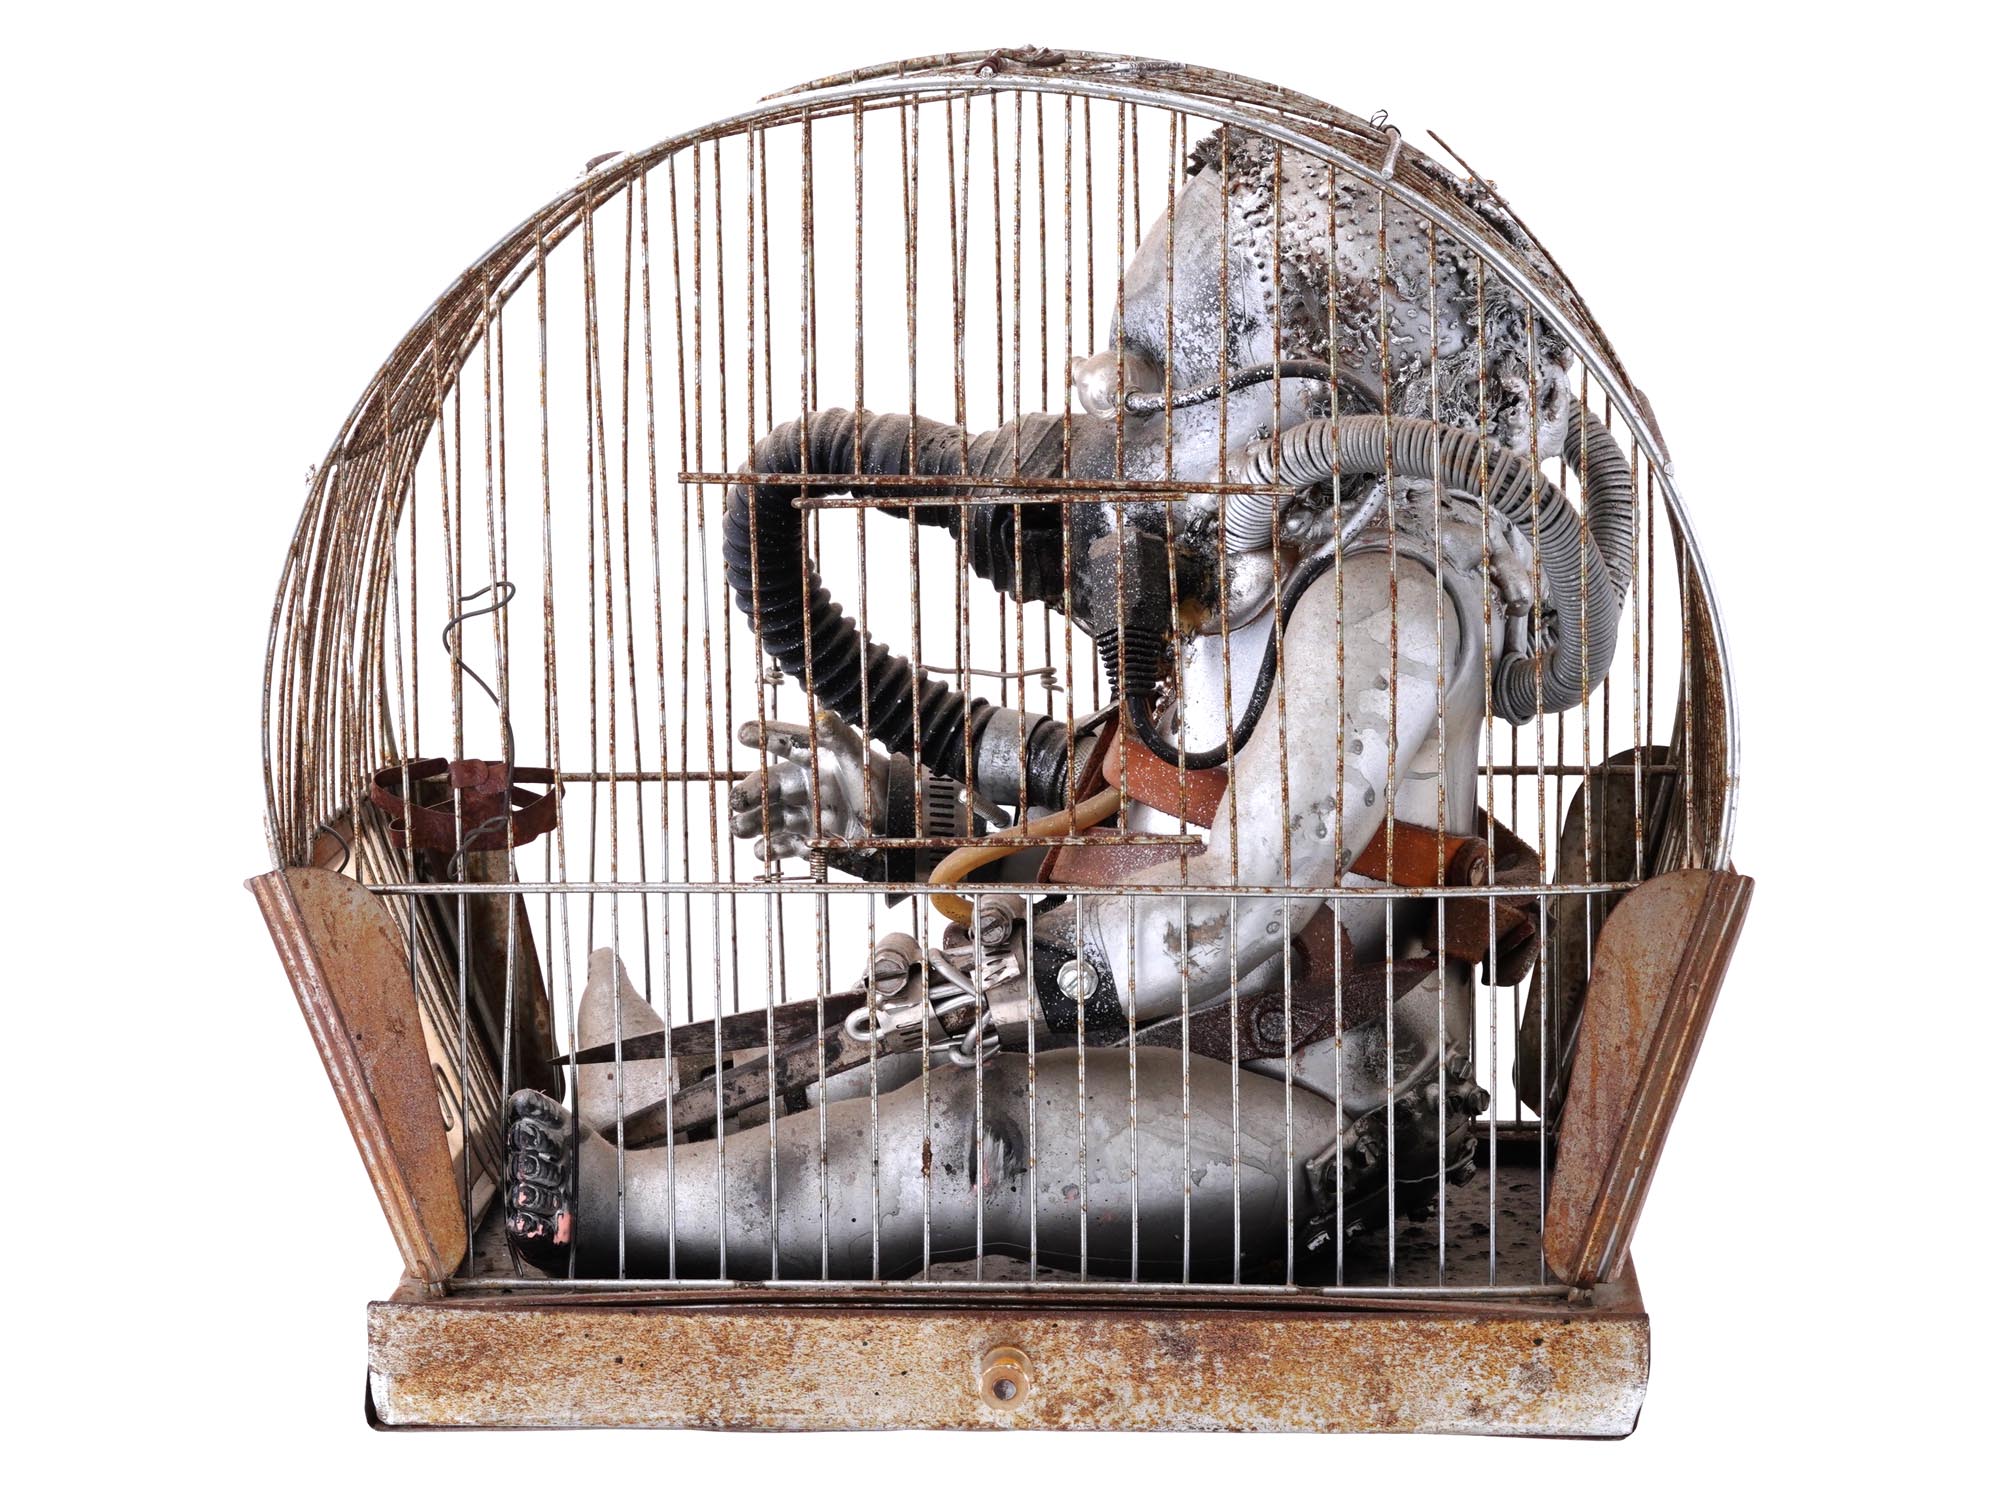 AMERICAN CAGE CELLS SCULPTURE BY LOUISE BOURGEOIS PIC-3